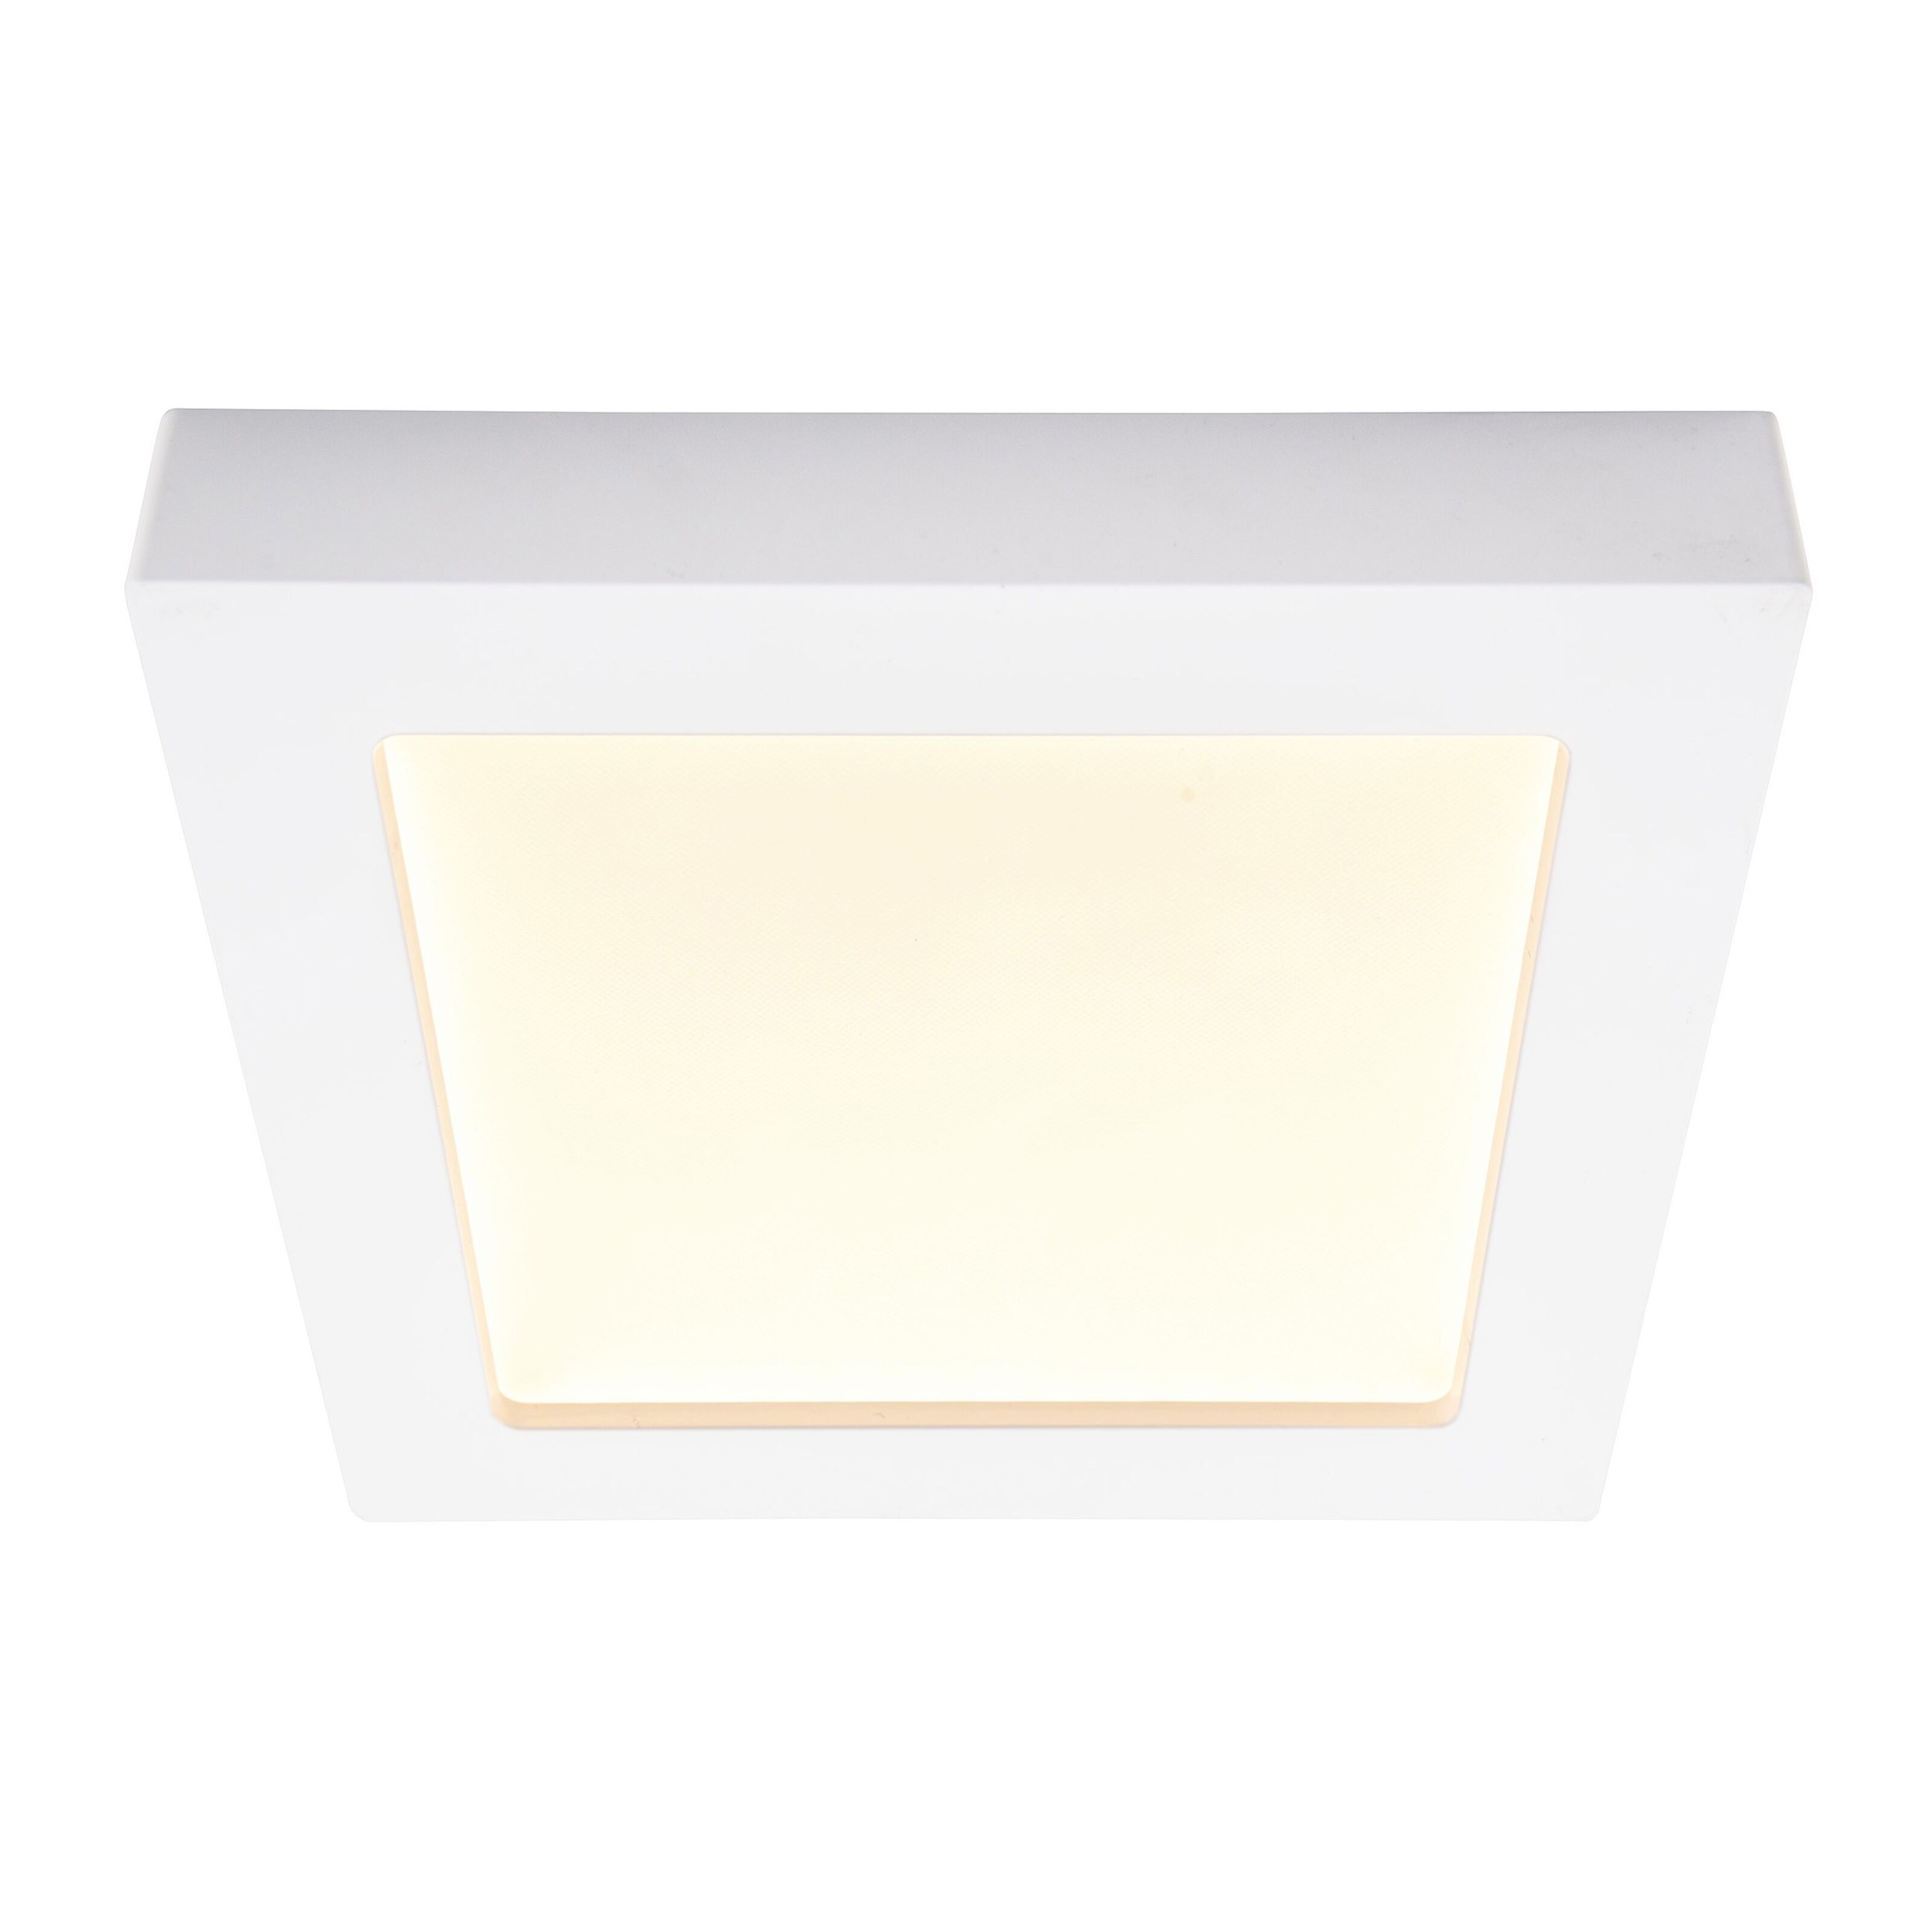 Buy wholesale LED built-in/surface-mounted light 